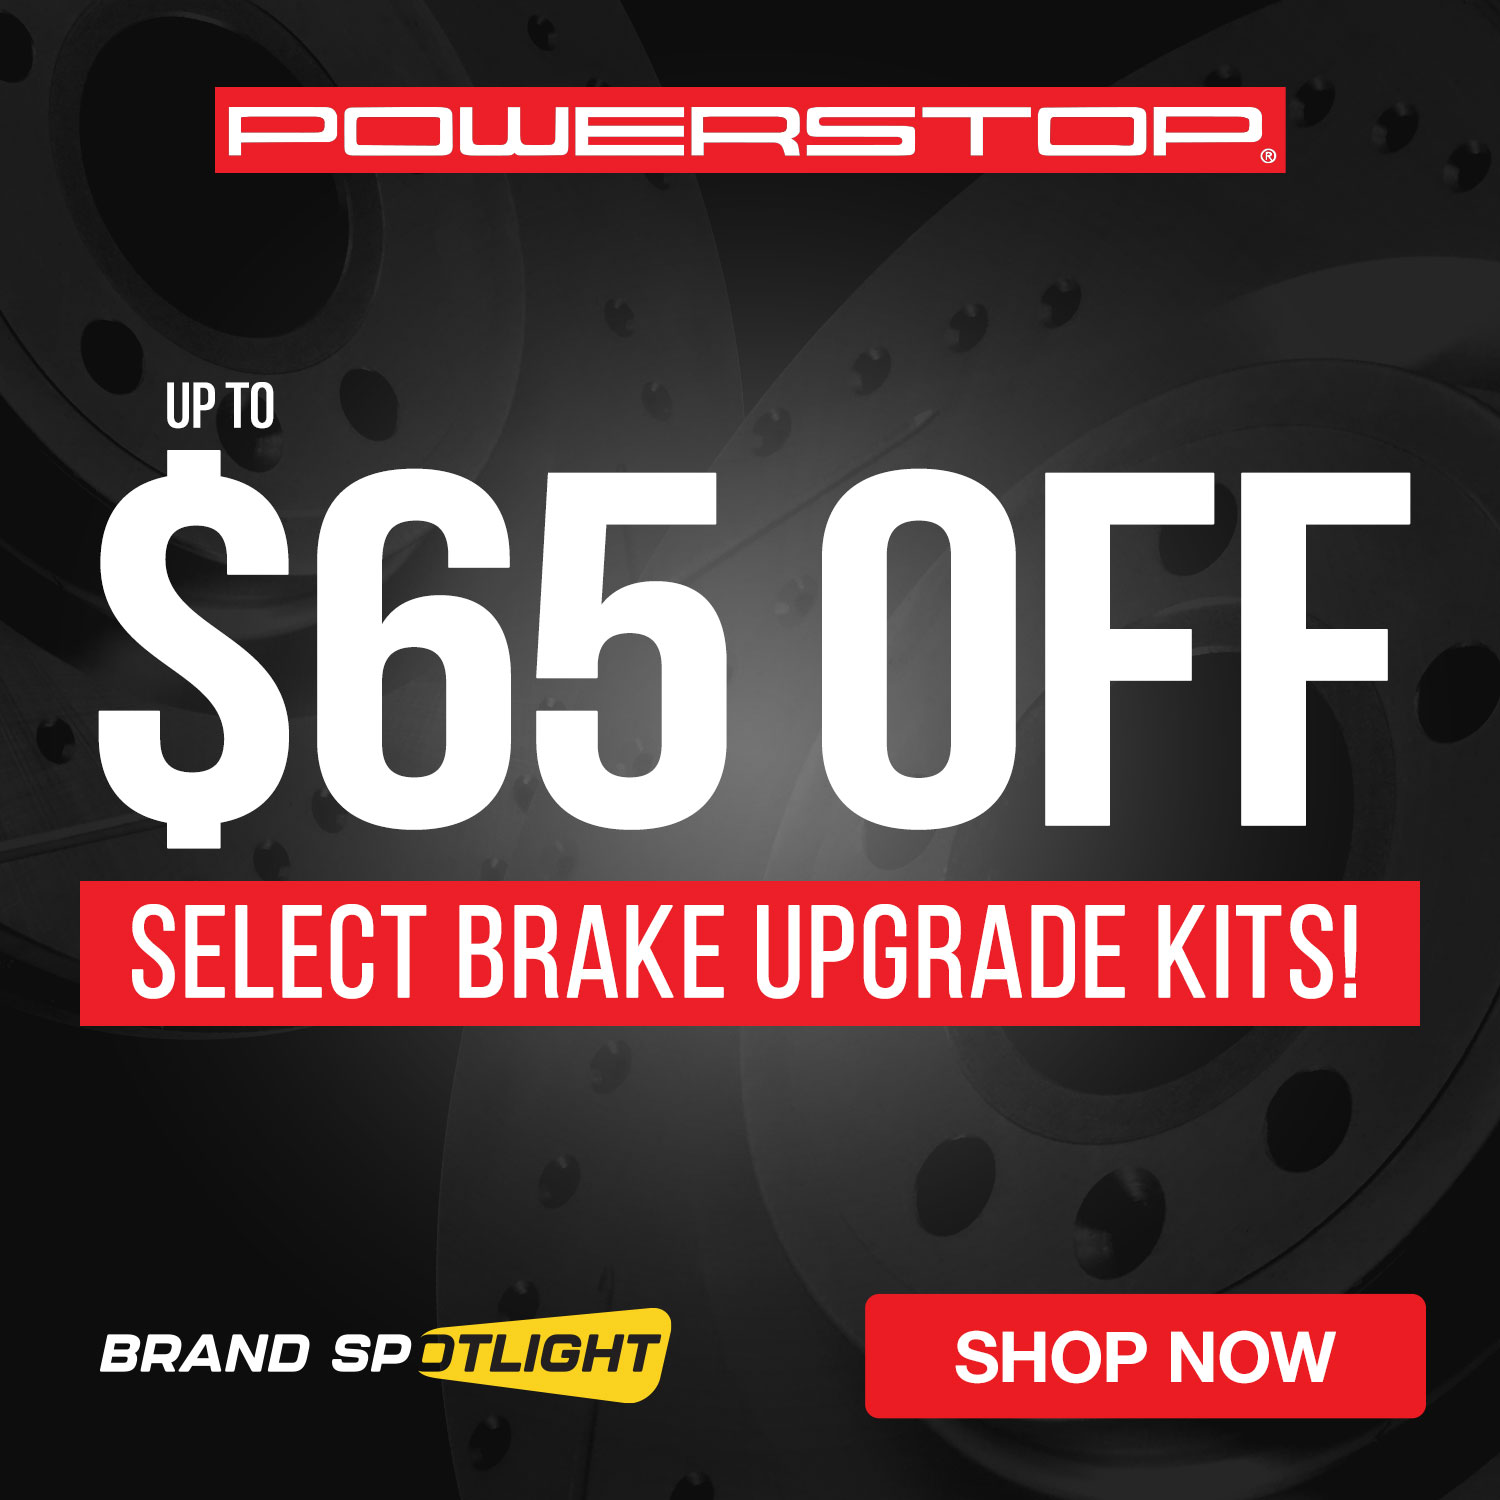 Up to $65 OFF Powerstop Brake Upgrade Kits for a limited time!